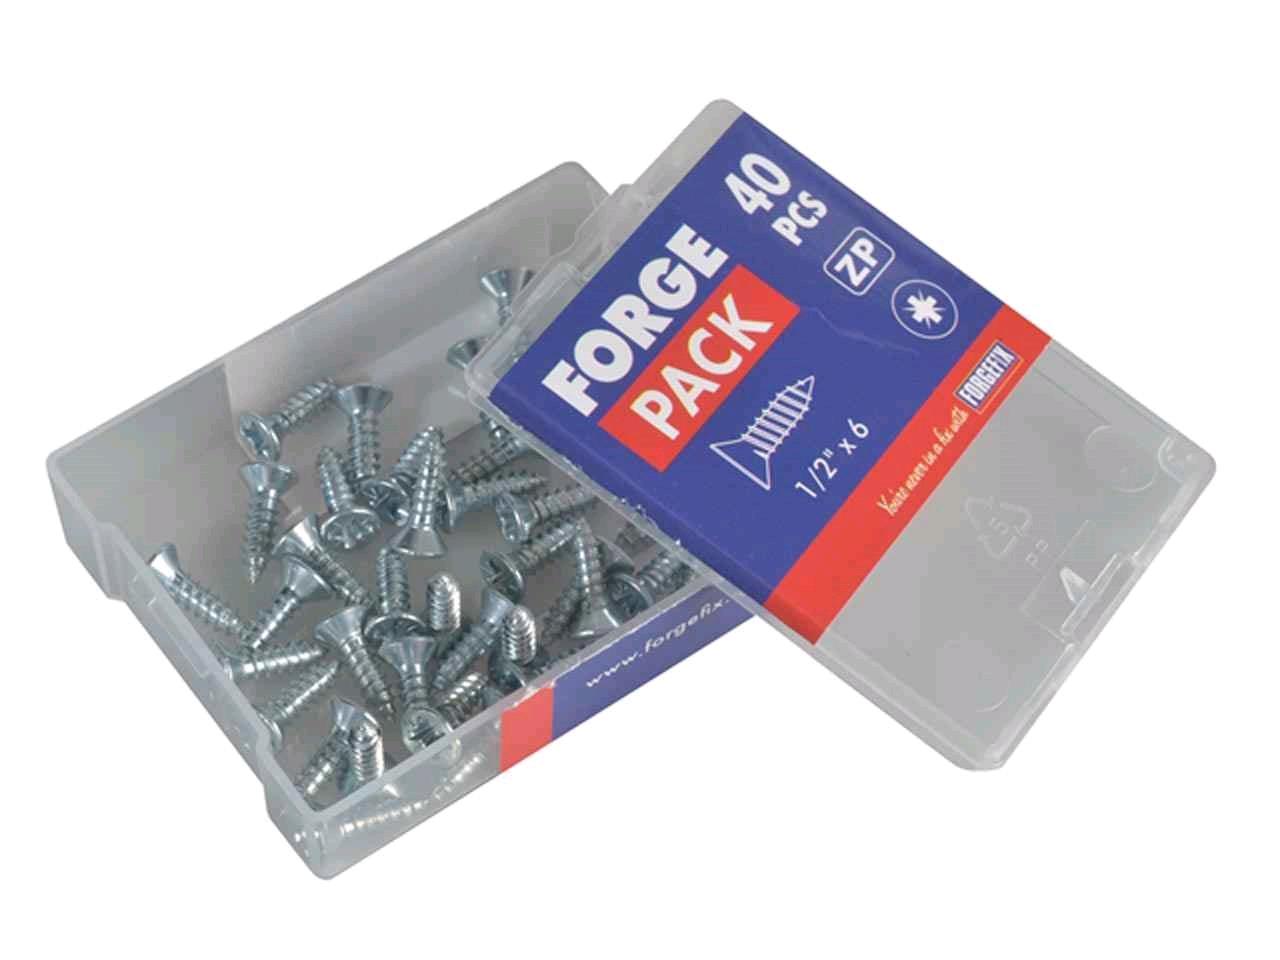 Forgefix 1/2" x 6  Self Tapping Screw Countersunk (Pack of 40) Zinc Plated 